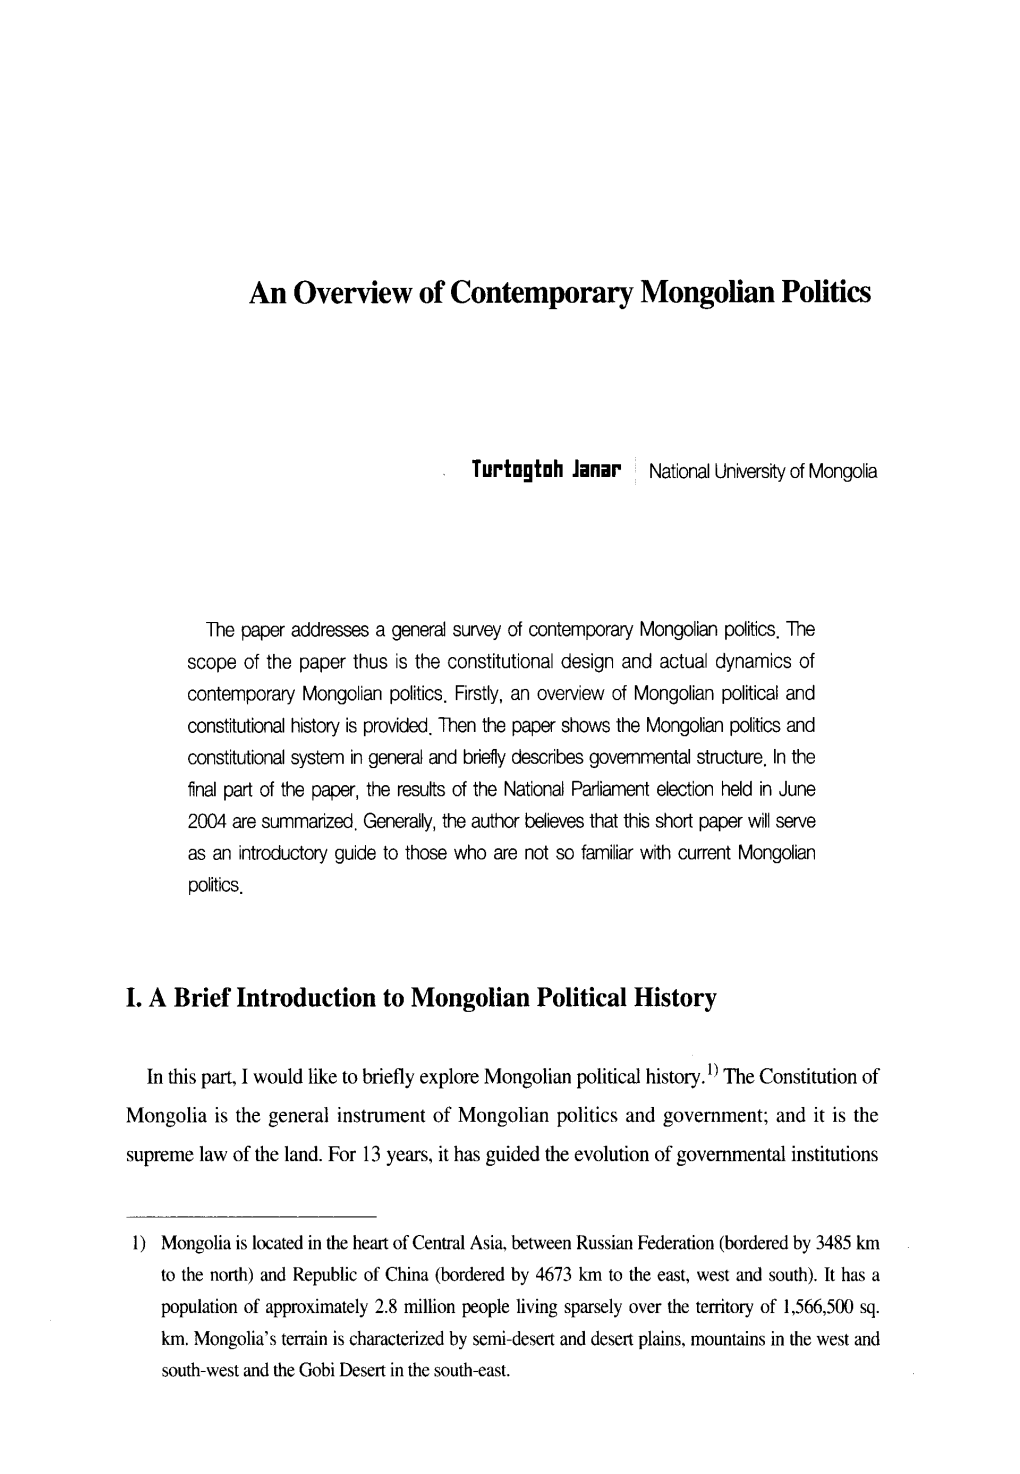 An Overview of Contemporary Mongolian Politics